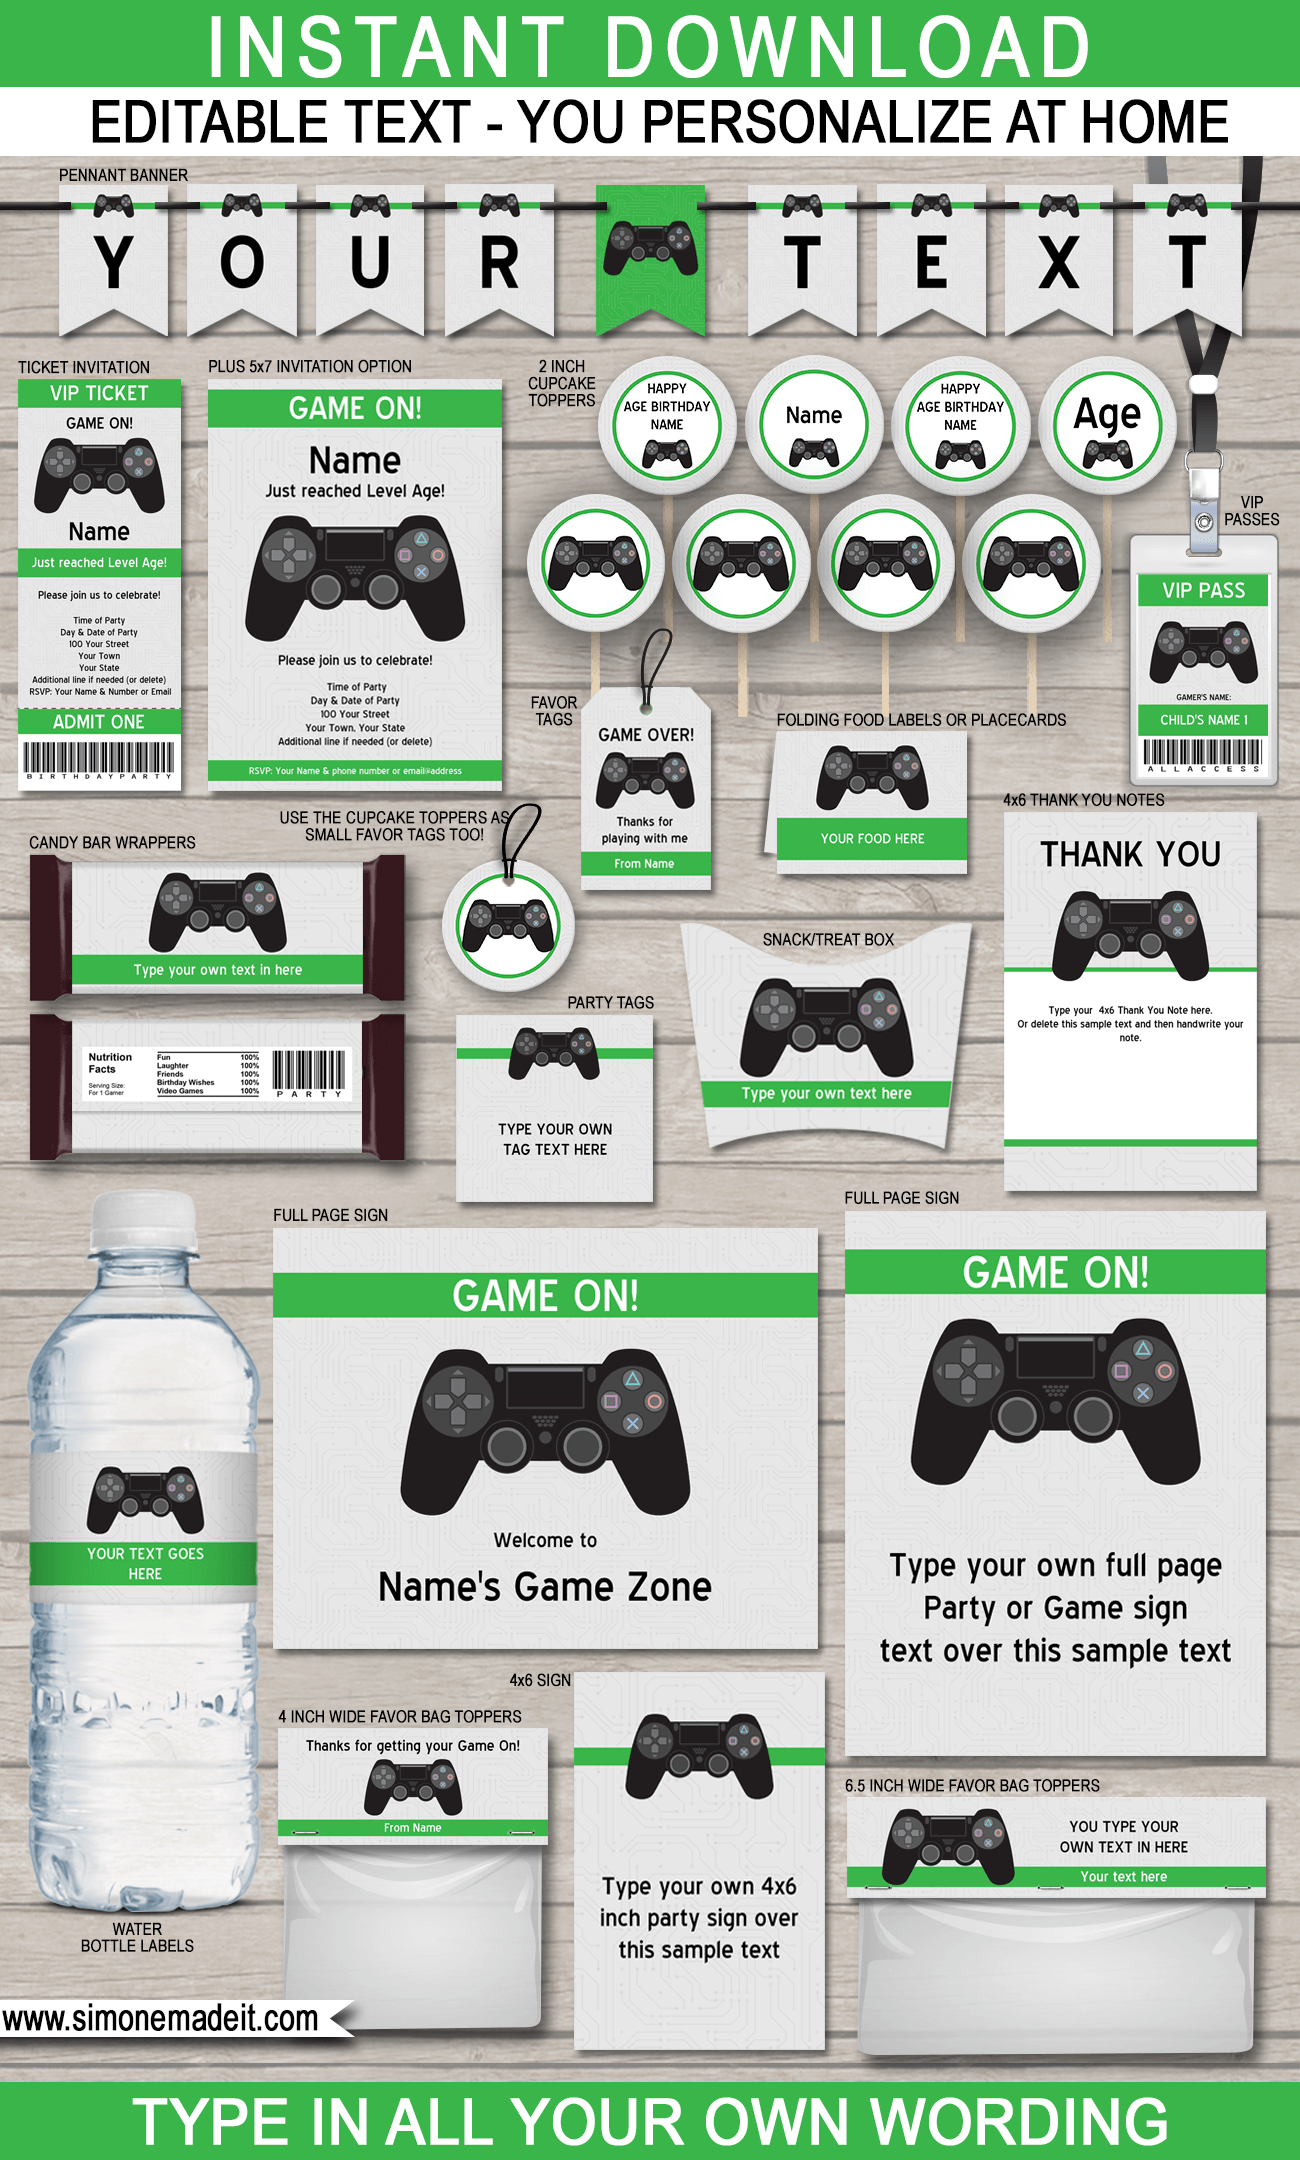 Printable Playstation Birthday Party Invitations & Decorations - Video Game Birthday Party Themes - Editable & Printable templates - INSTANT DOWNLOAD via simonemadeit.com